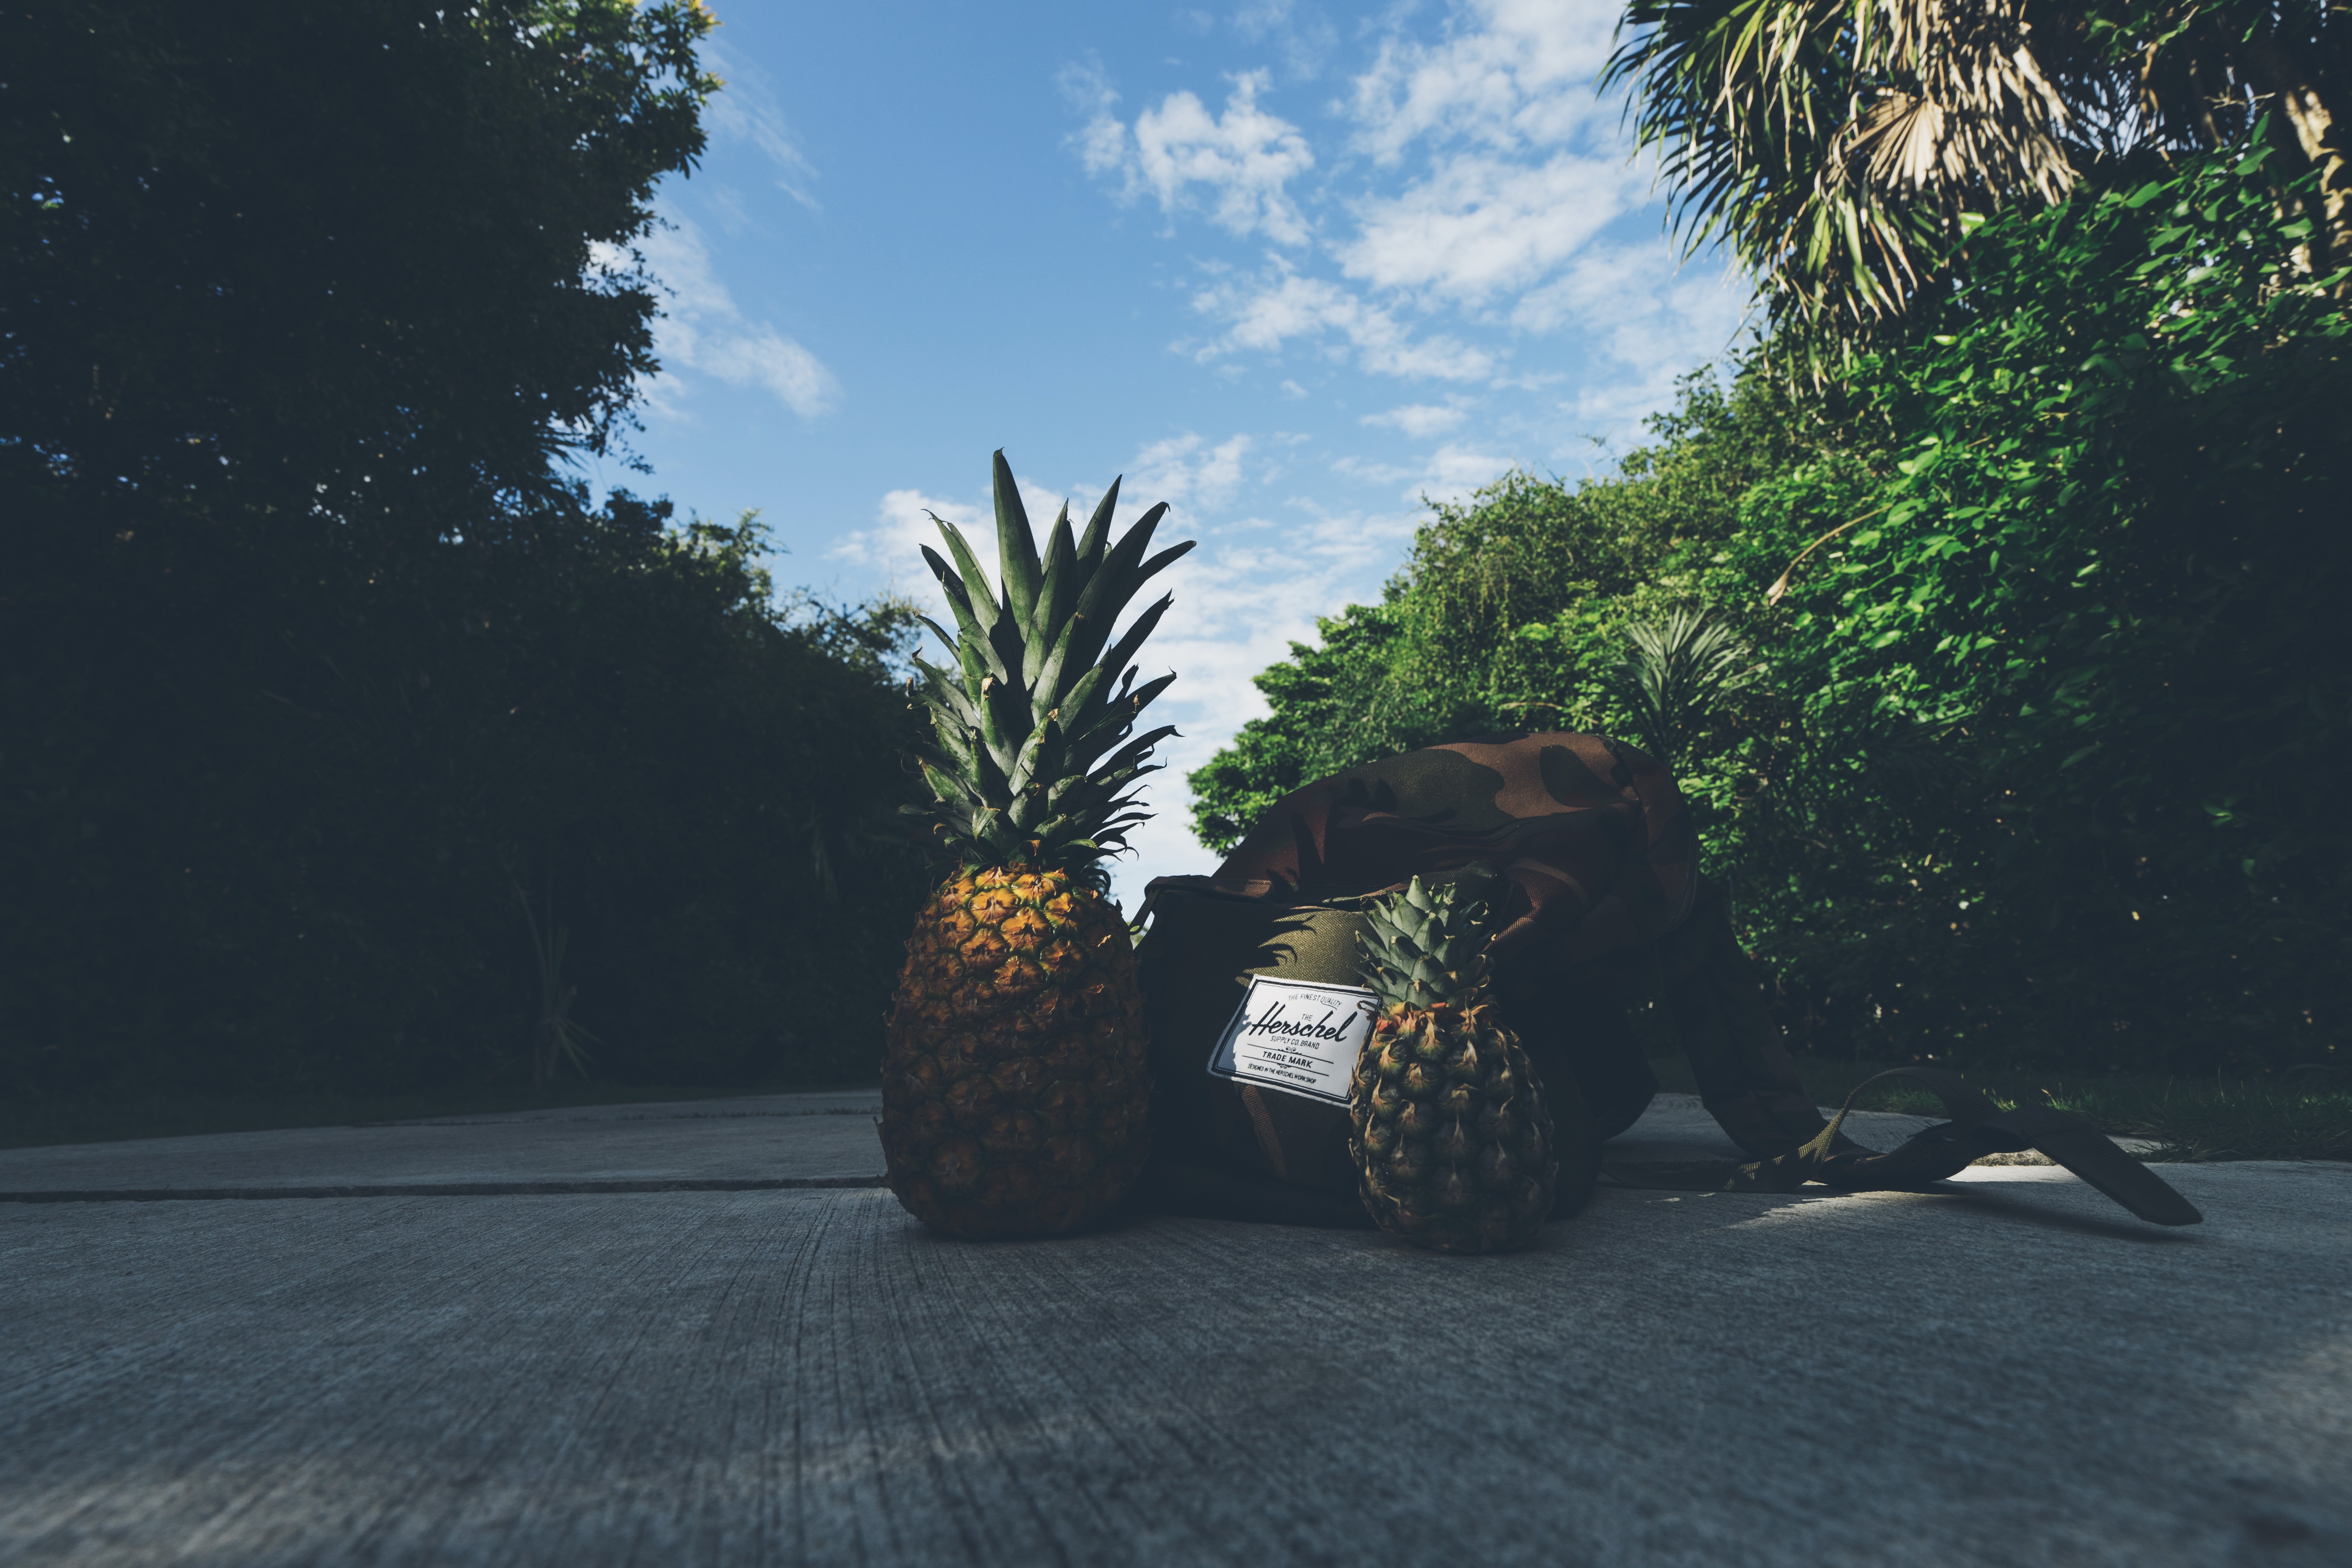 Pineapples Beside Backpack, Backpack, Pathway, Tropical, Trees, HQ Photo